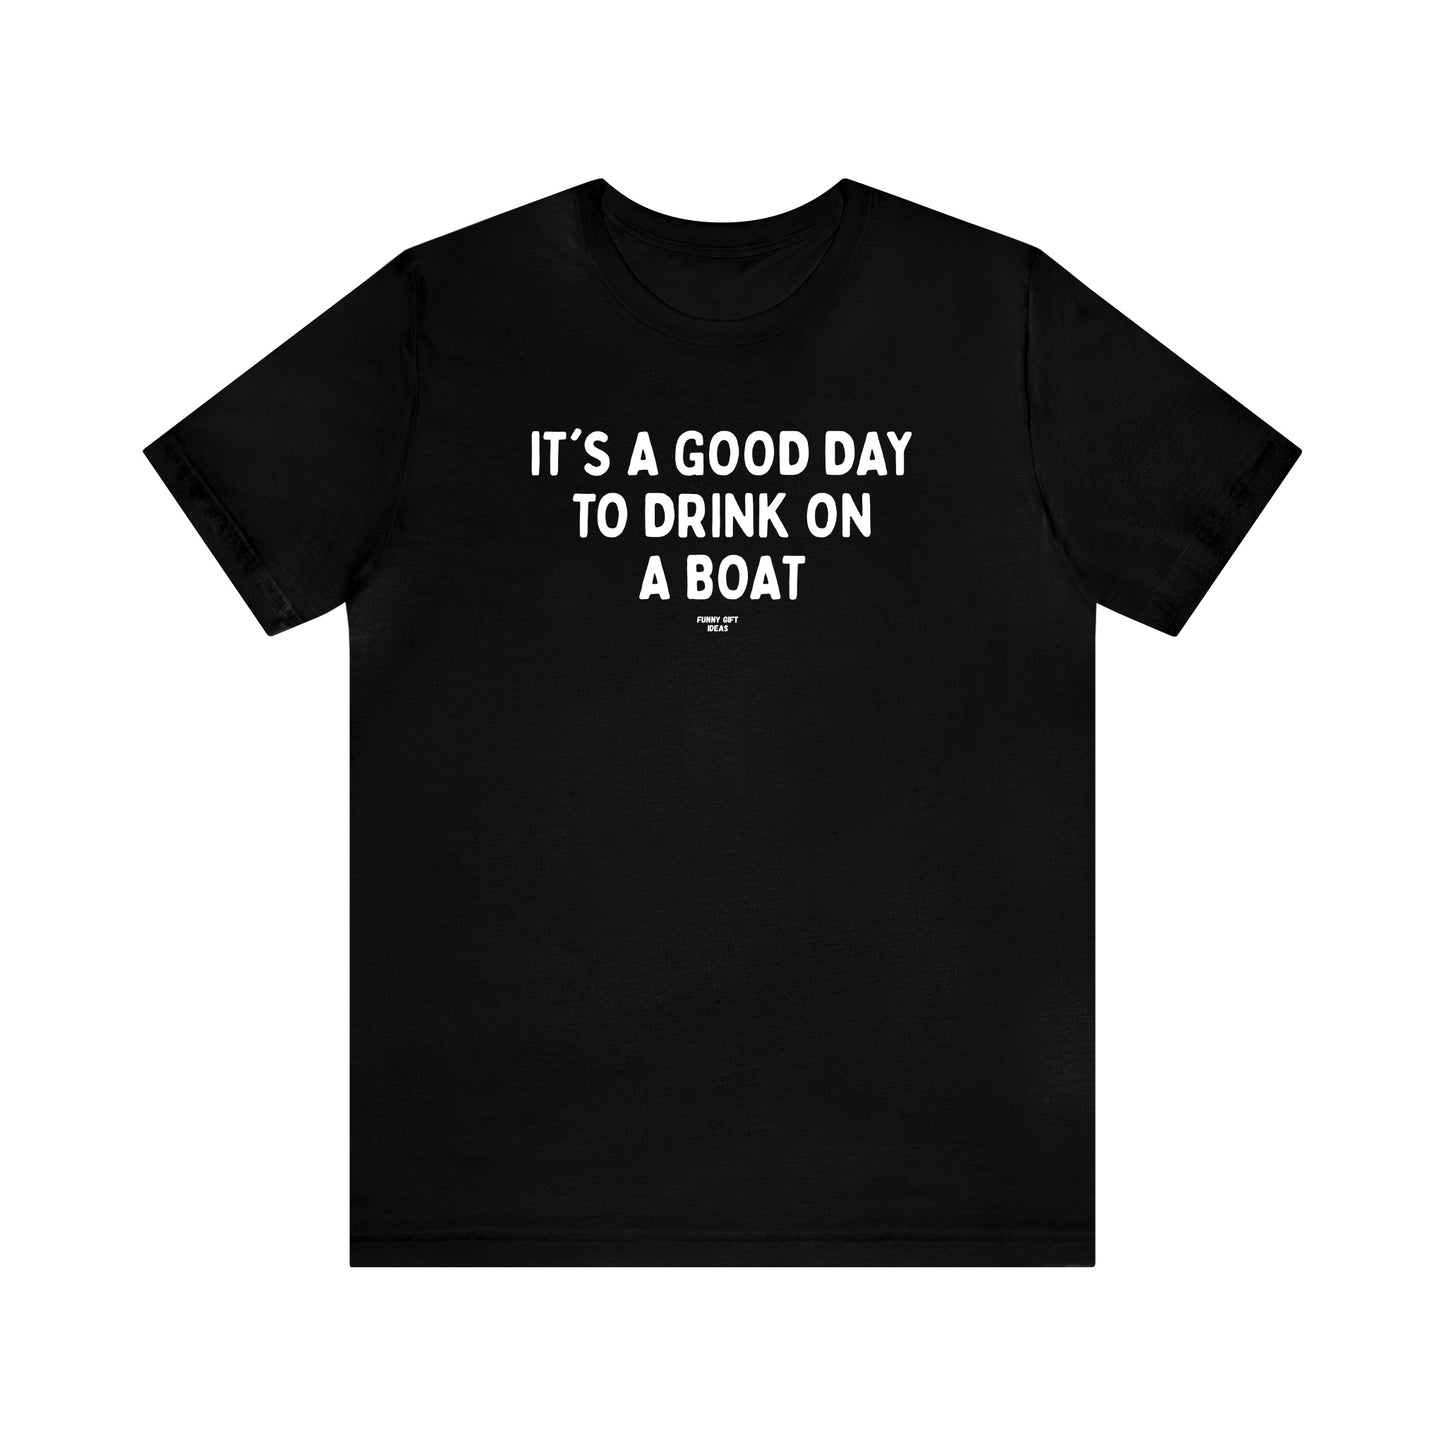 Mens T Shirts - It's a Good Day to Drink on a Boat - Funny Men T Shirts